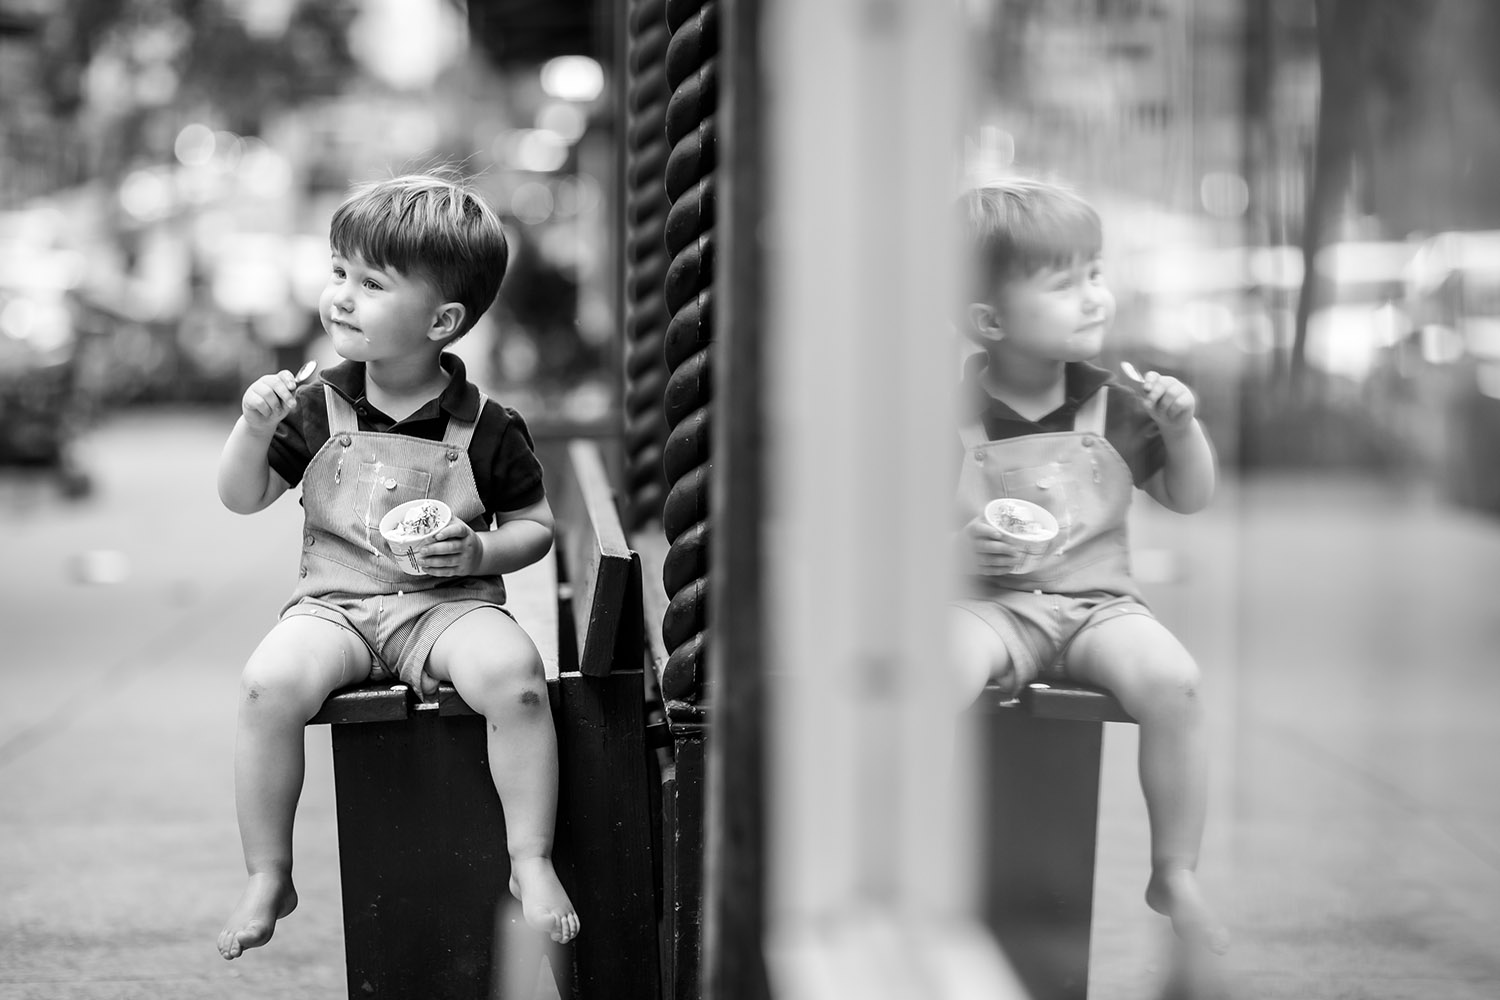 Little Boy sitting on a bench while eating ice cream